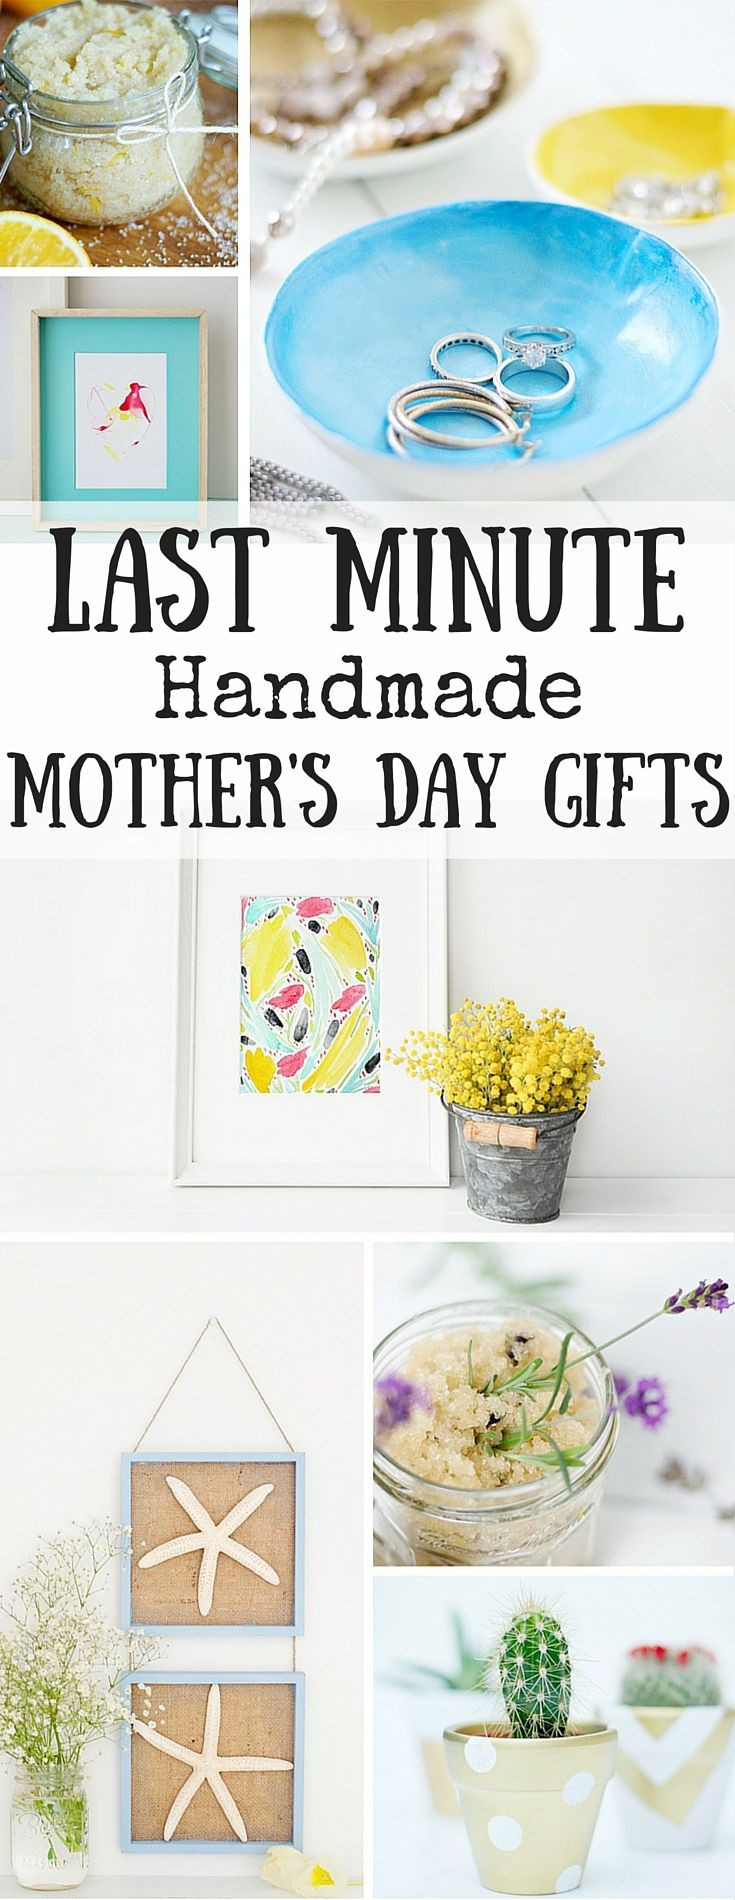 Last Minute Birthday Gifts For Mom
 Last Minute Handmade Mothers Day Gifts